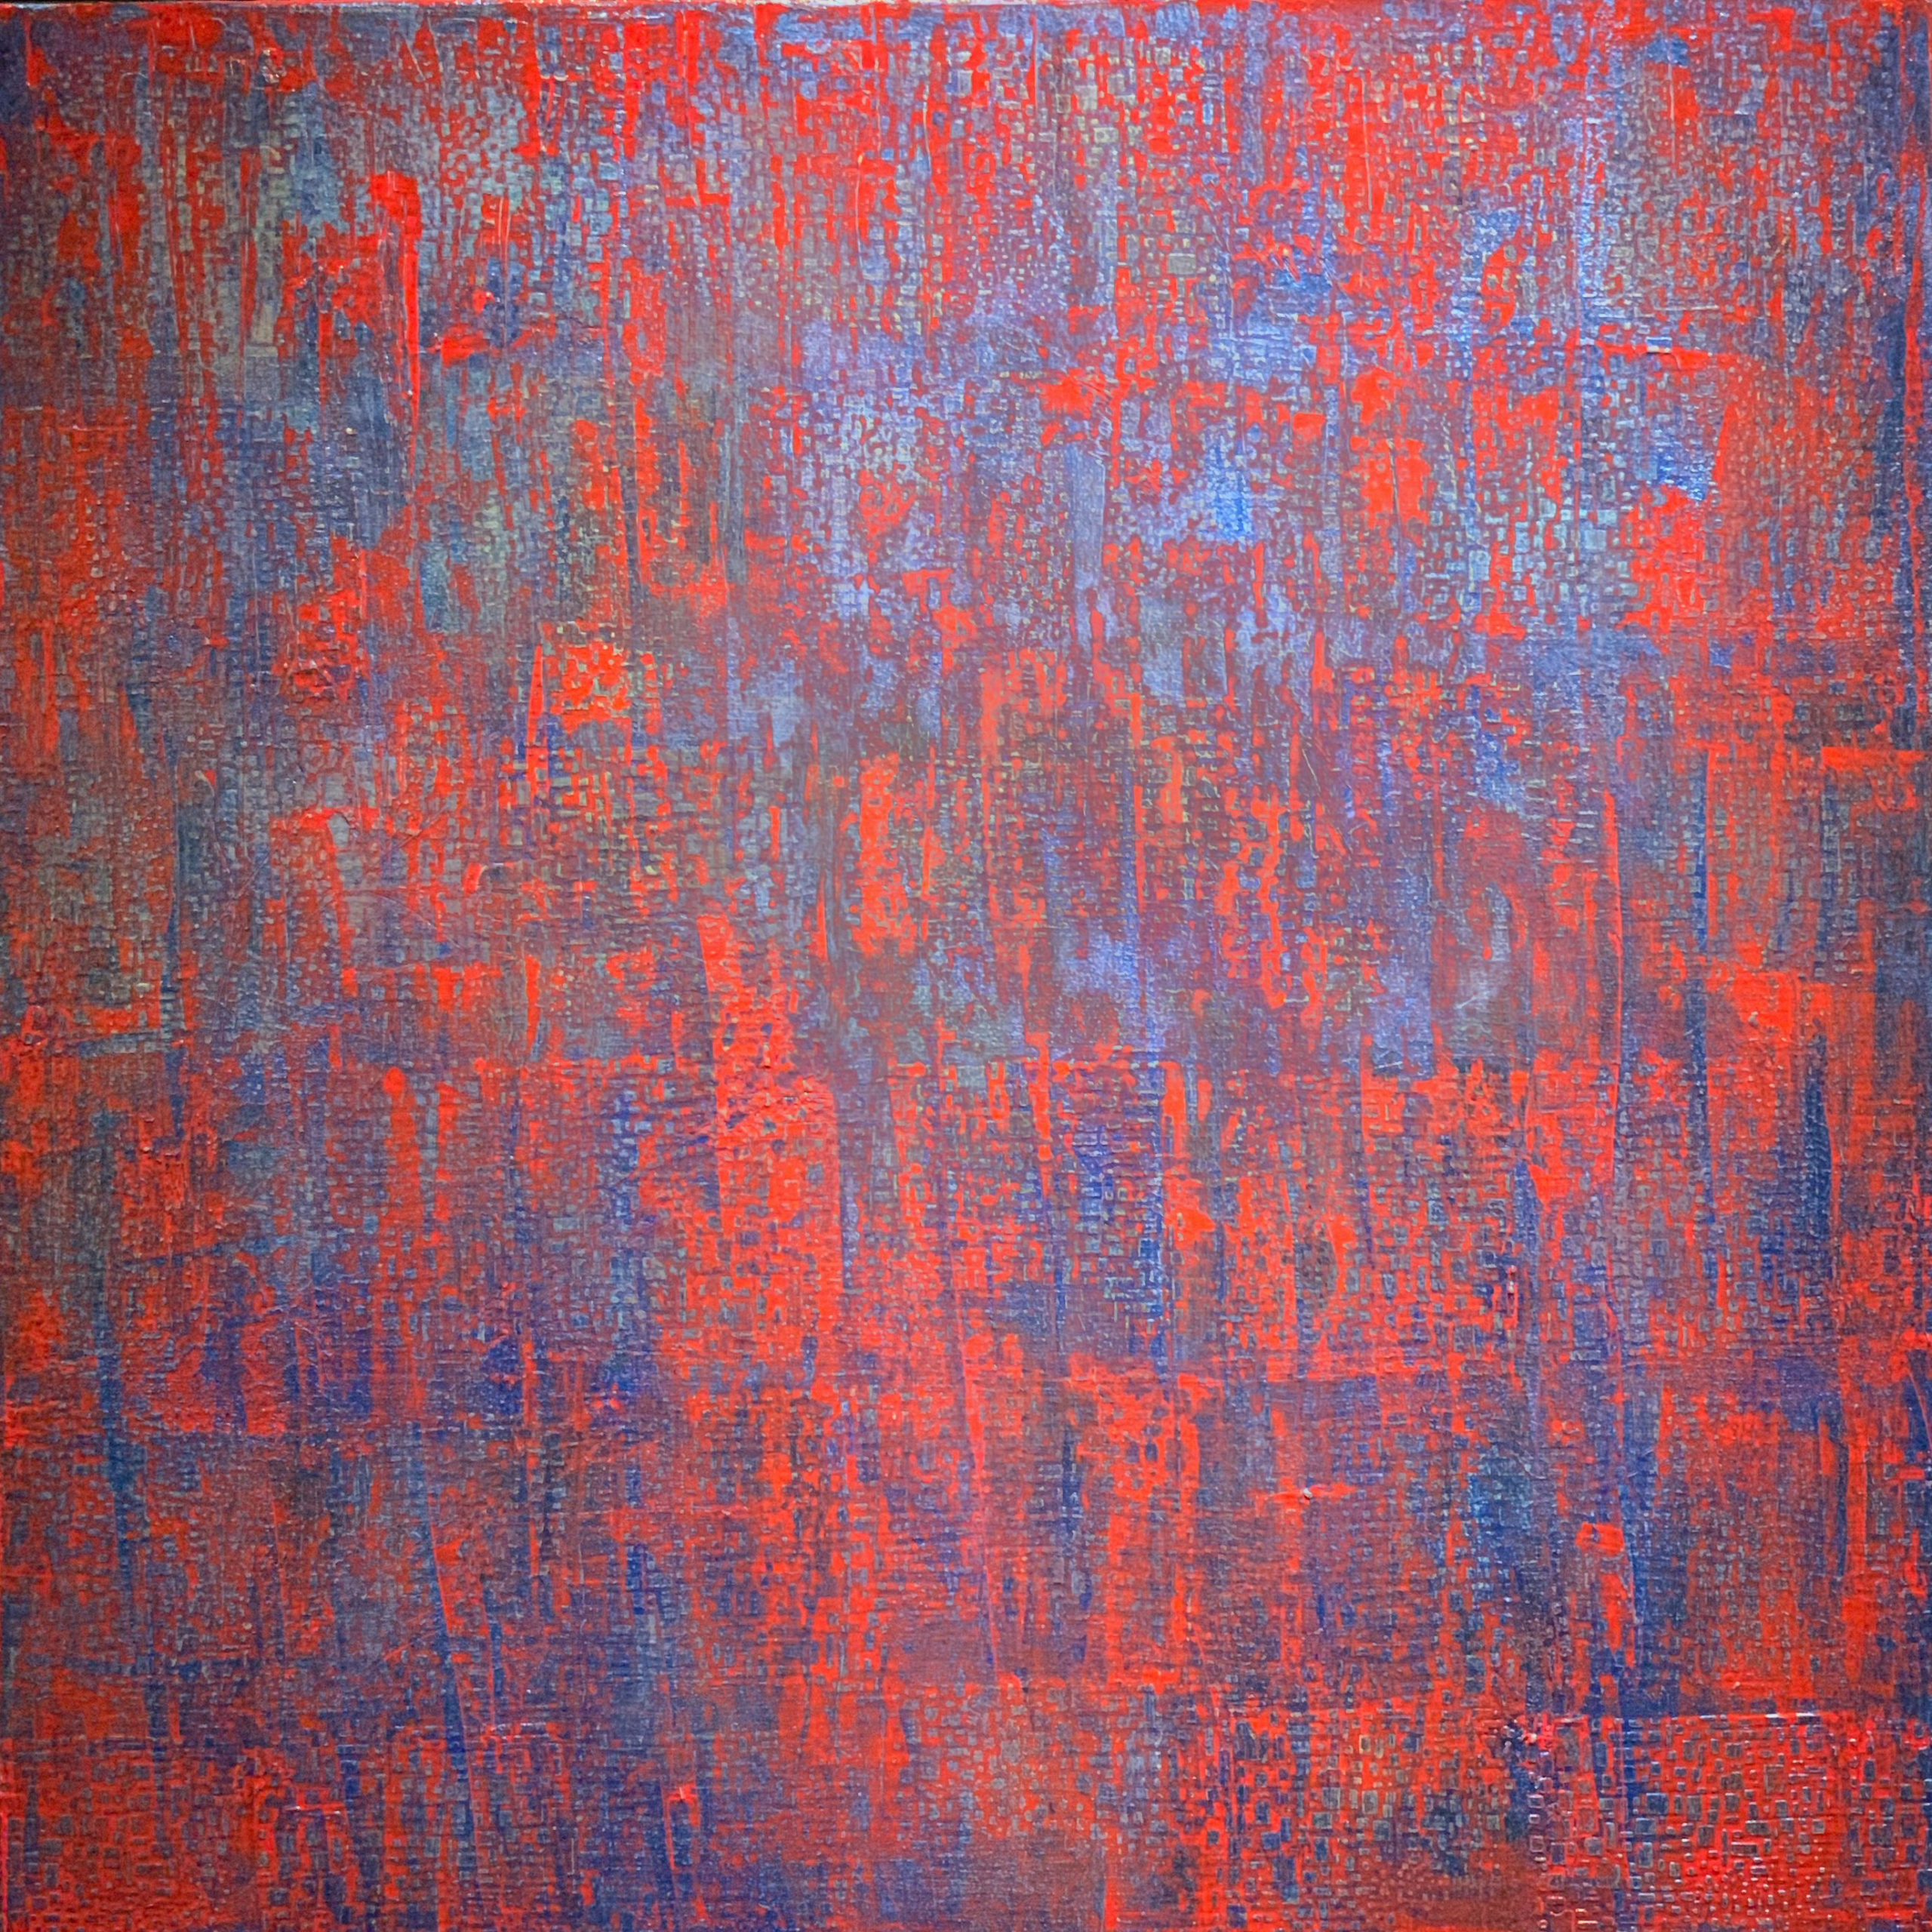 Hot Shimmer by Paul Hrusovsky, acrylic on canvas, 36 x 36 at Craven Allen Gallery 1800